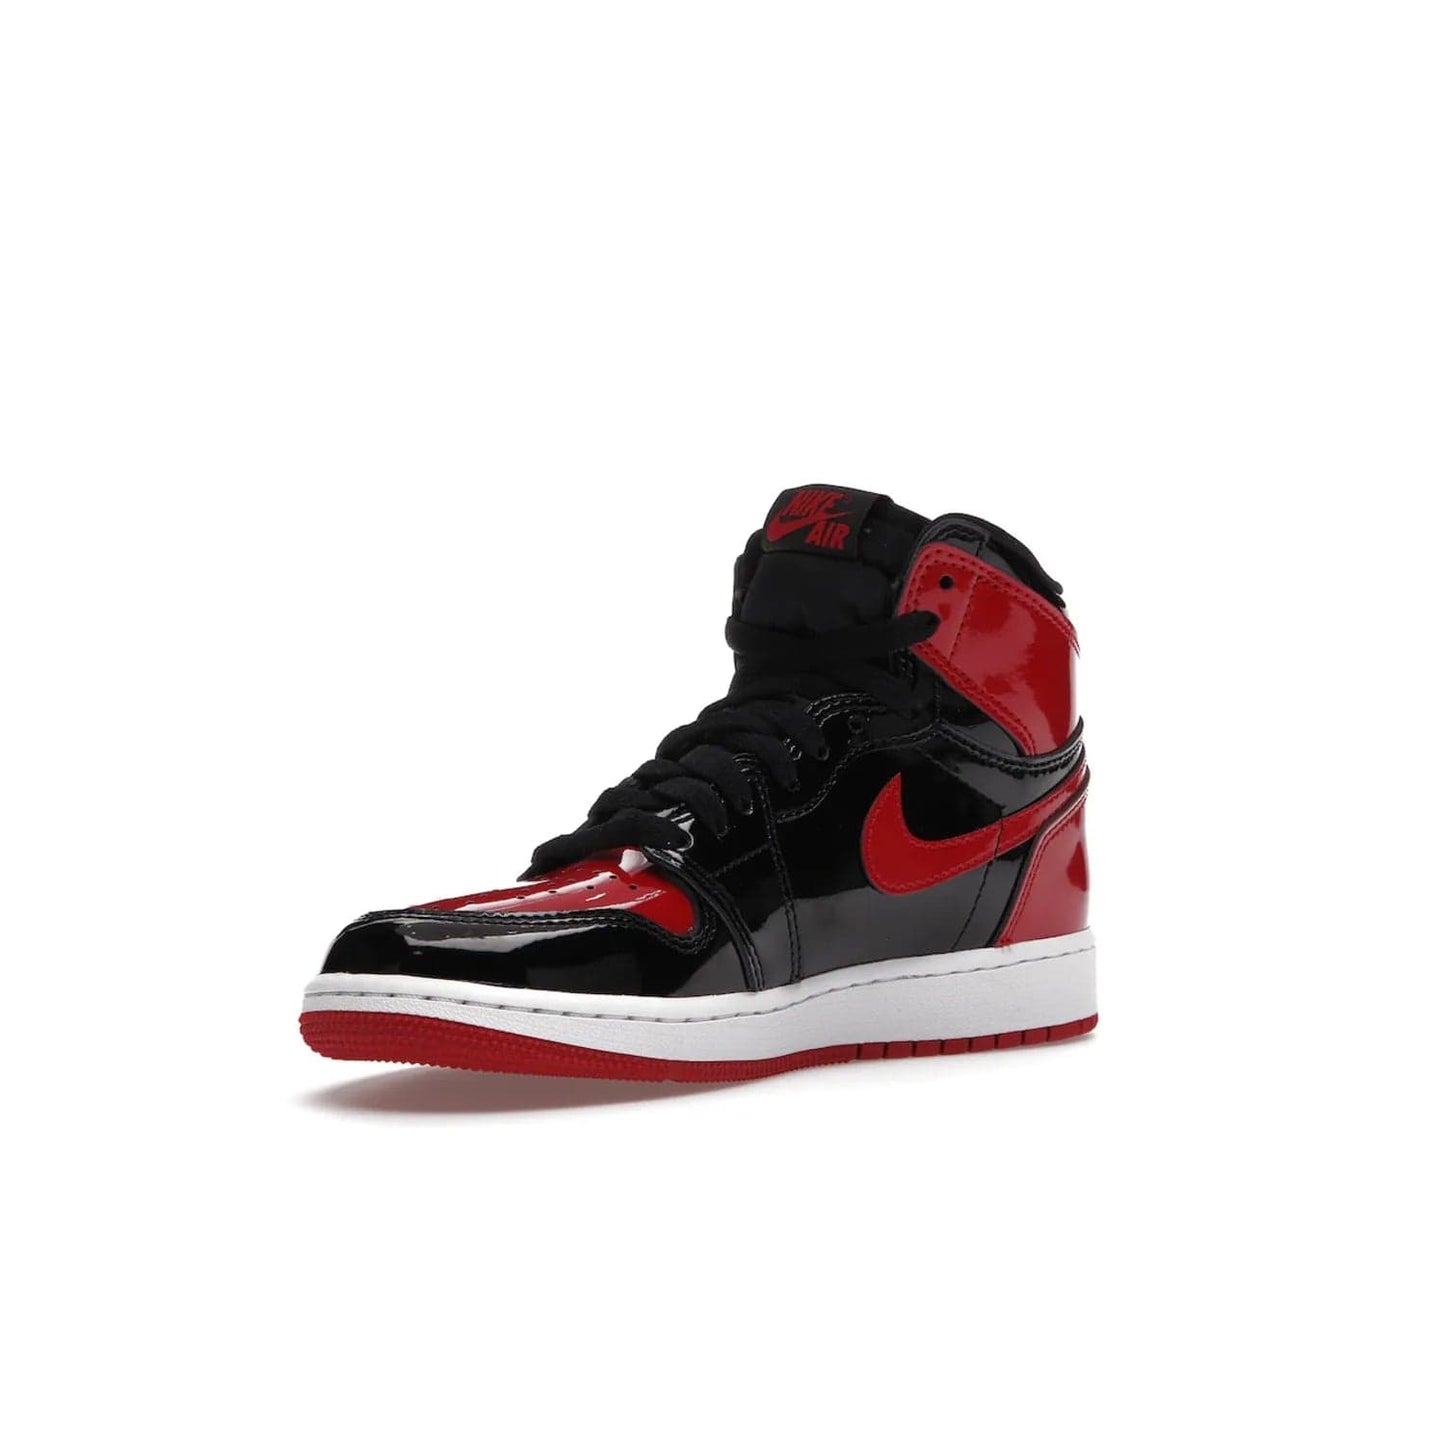 Jordan 1 Retro High OG Patent Bred (GS) - Image 15 - Only at www.BallersClubKickz.com - Upgrade your sneaker game with the iconic Air Jordan 1 Retro High OG Bred Patent GS. Crafted with premium patent leather and basketball-inspired details for a classic look, they also feature an encapsulated Air-sole cushioning and enhanced red rubber outsole. Don't miss this timeless sneaker with a striking black, white, and varsity red colorway, dropping December 2021.